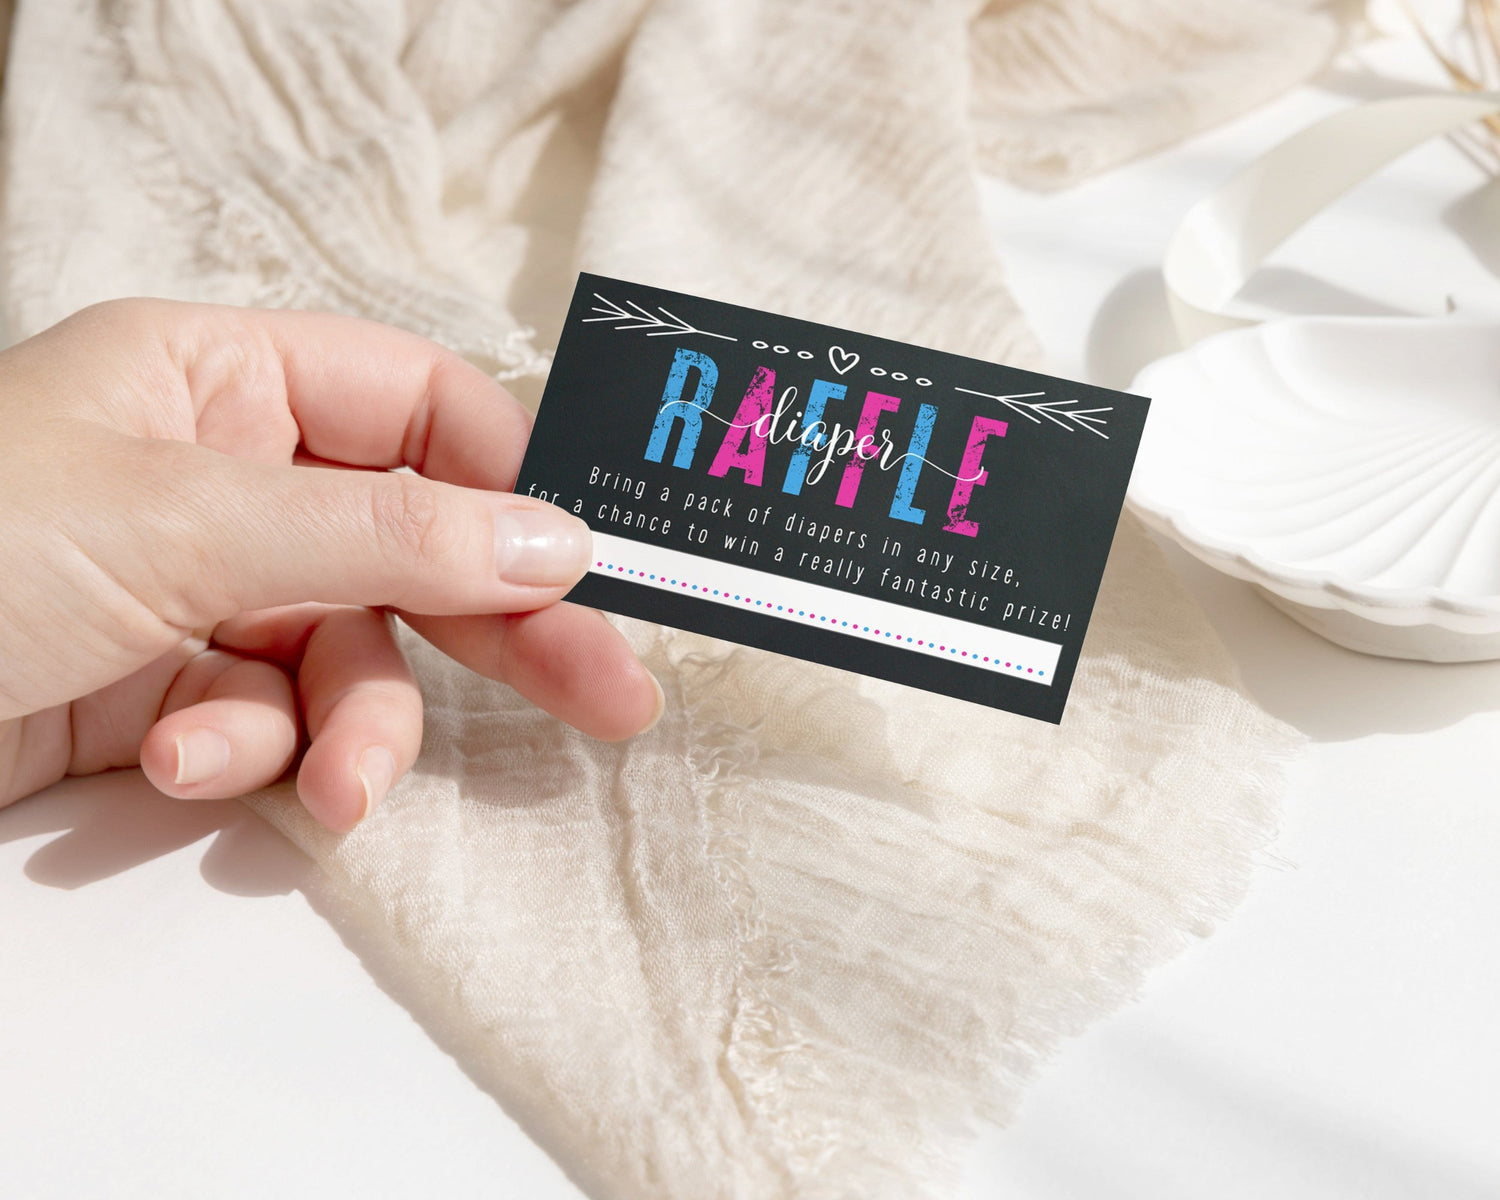 Add a fun twist to your baby shower with our Diaper Raffle Invitation Insert Cards. Featuring a variety of popular baby shower themes, these cards are the perfect way to encourage guests to help stock the nursery. Join the raffle fun.